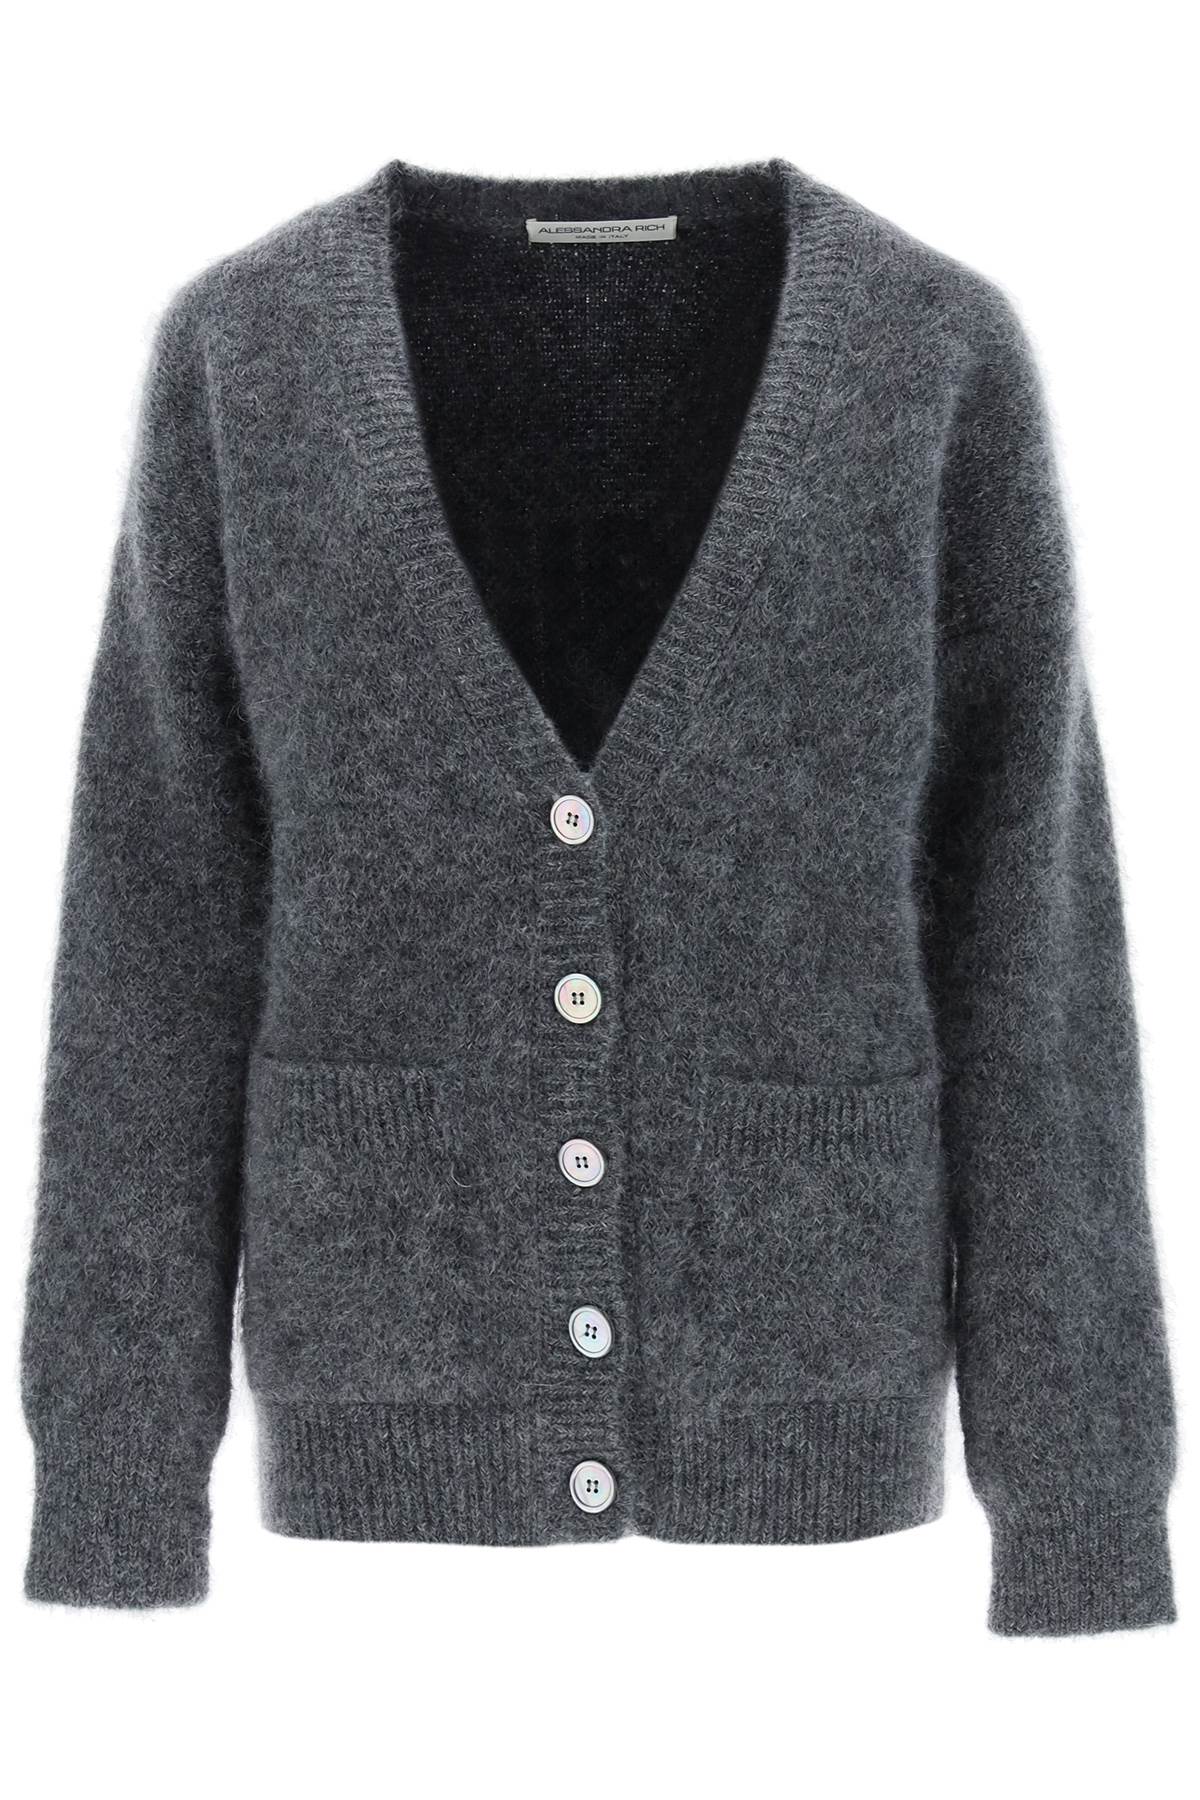 ALESSANDRA RICH CARDIGAN WITH BACK BEAR MOTIF AND APPLIQUES